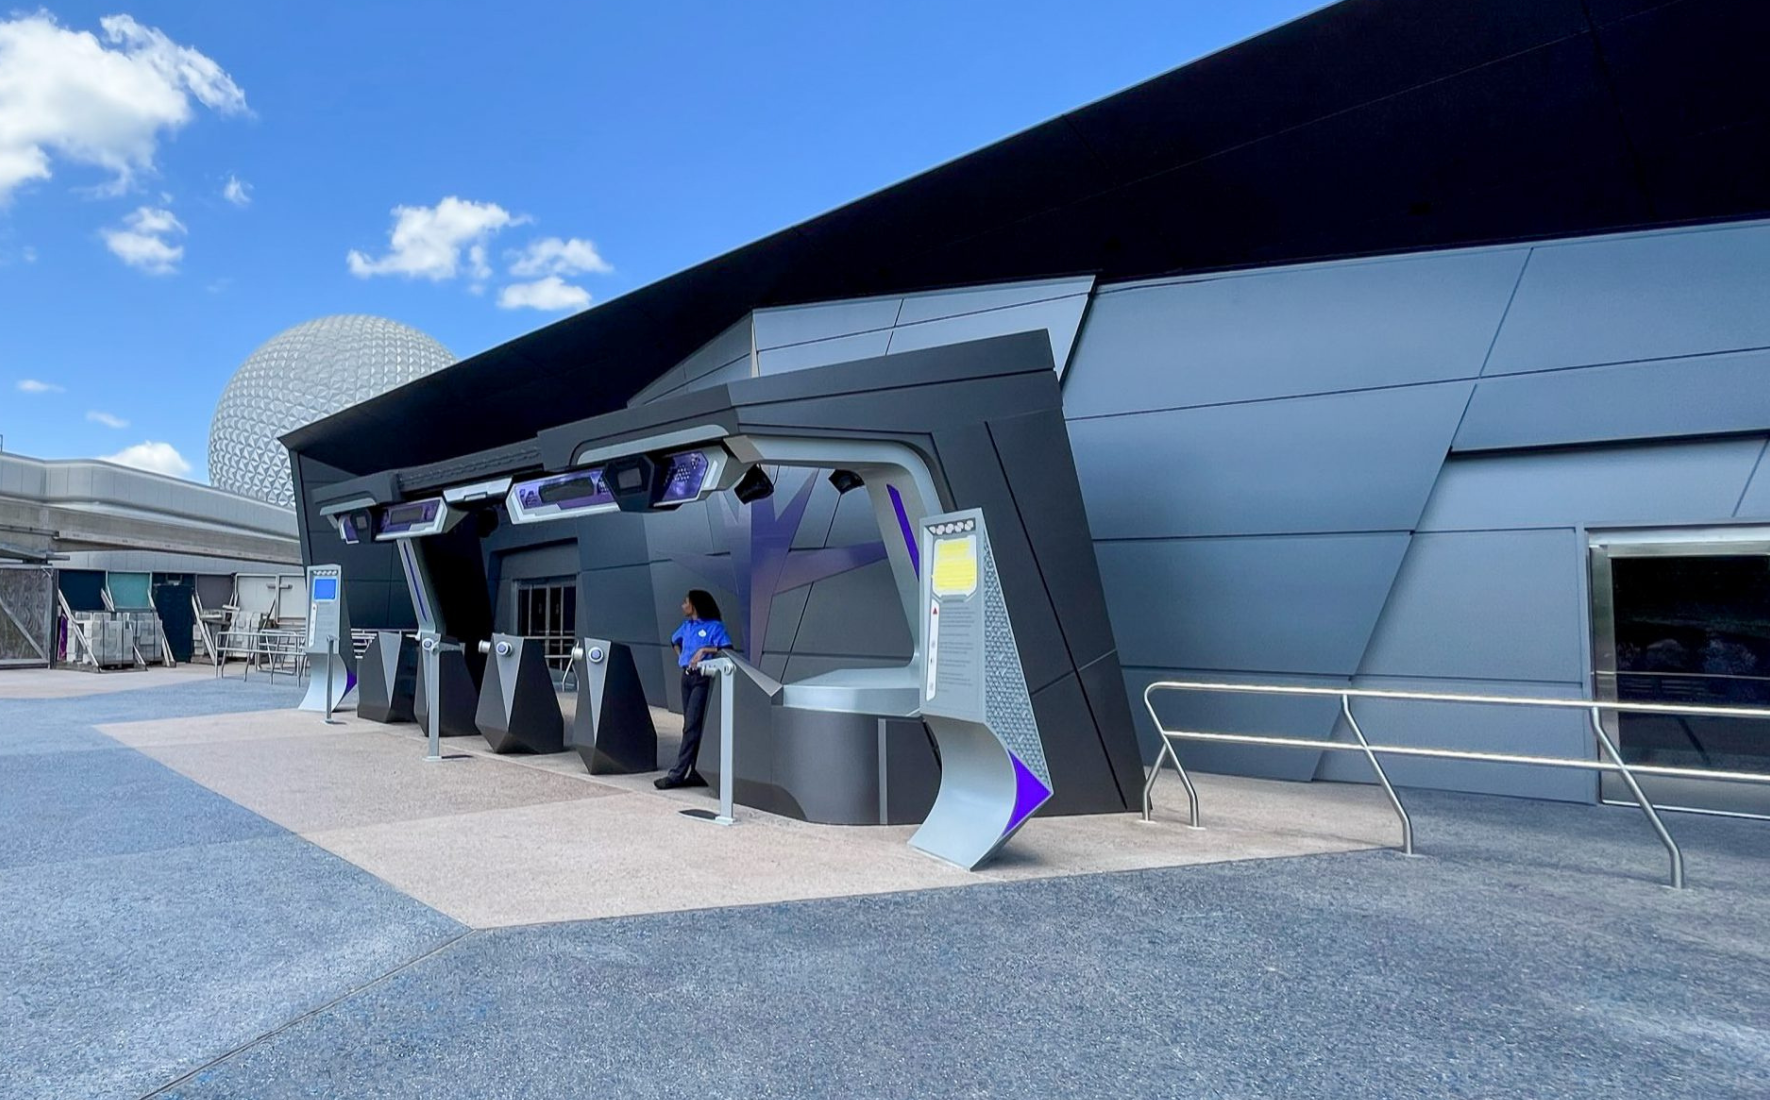 ALPOLIC MCM Contributes to the Futuristic Look of Epcots Newest Attraction